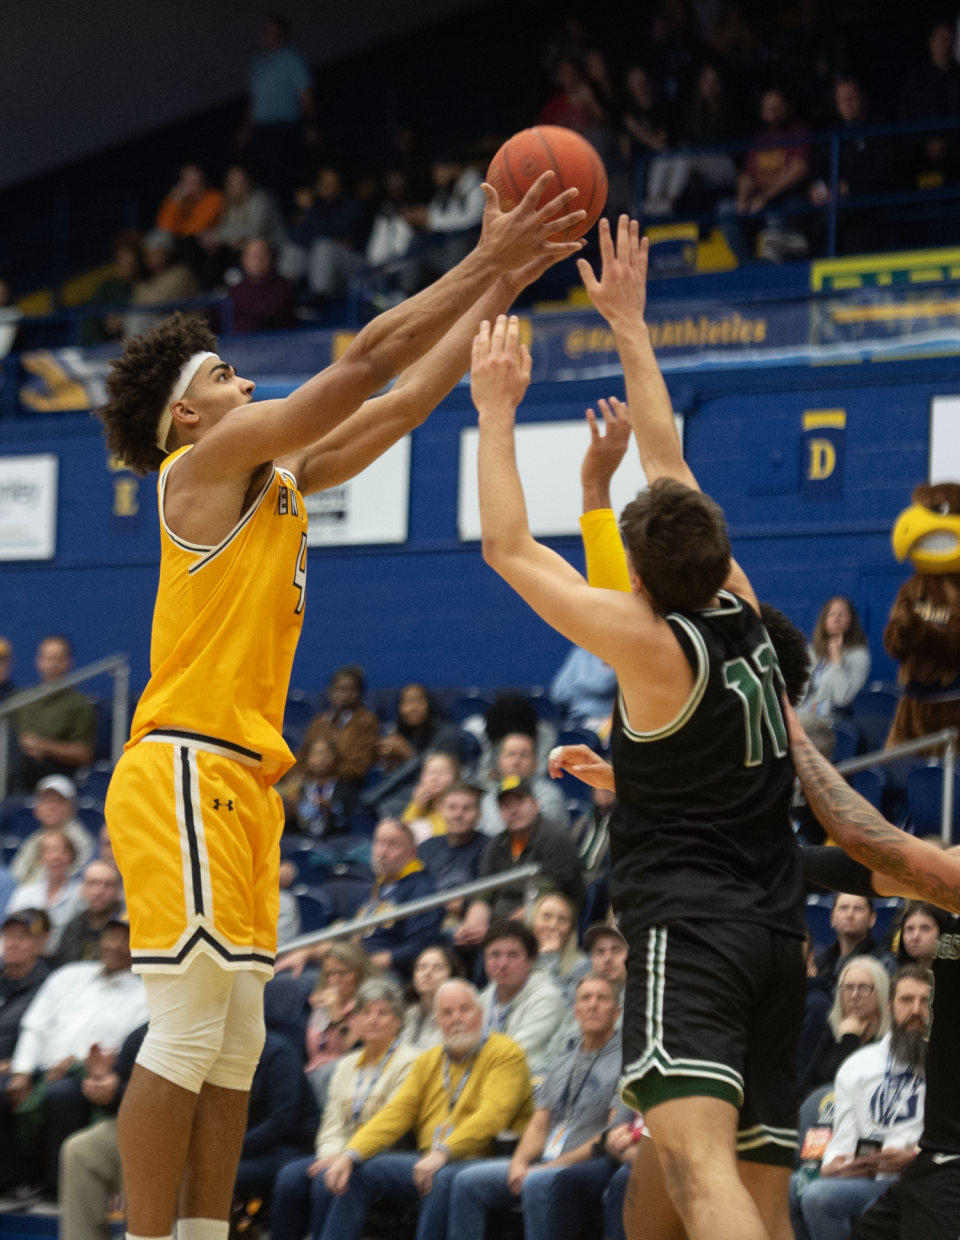 Kent State's Chris Payton Jr. pulls down a rebound during Saturday's game against Cleveland State.